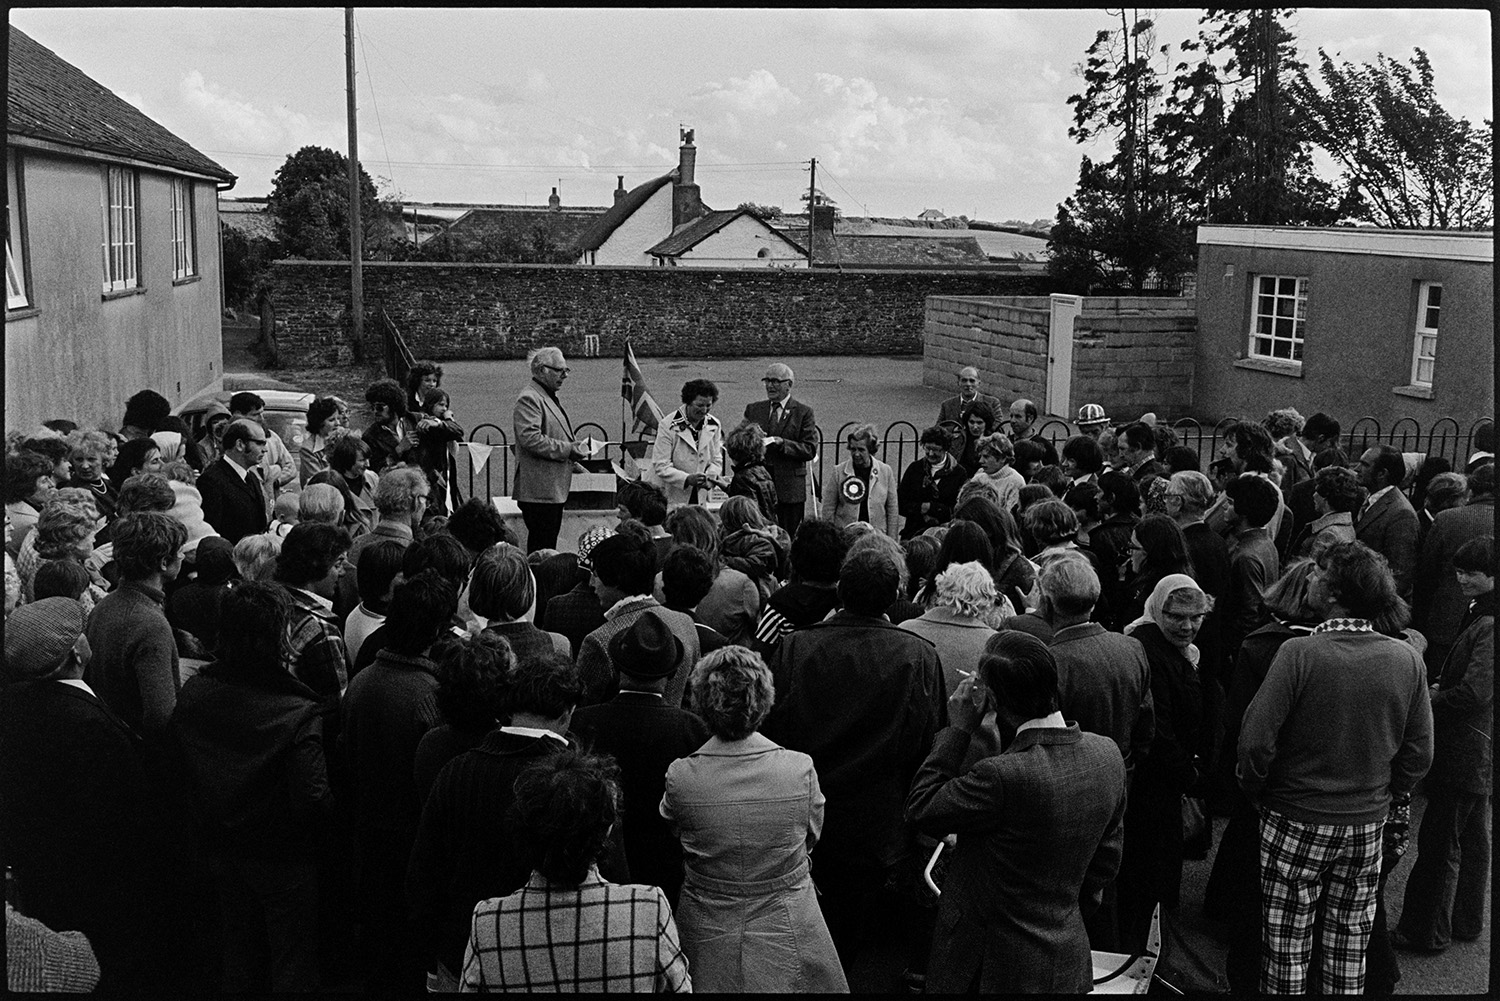 Presentation of mugs in street crowd watching. 
[Mrs Thomas presenting mugs to children in a street in High Bickington to celebrate the Silver Jubilee of Queen Elizabeth II. A crowd is watching the presentation.]